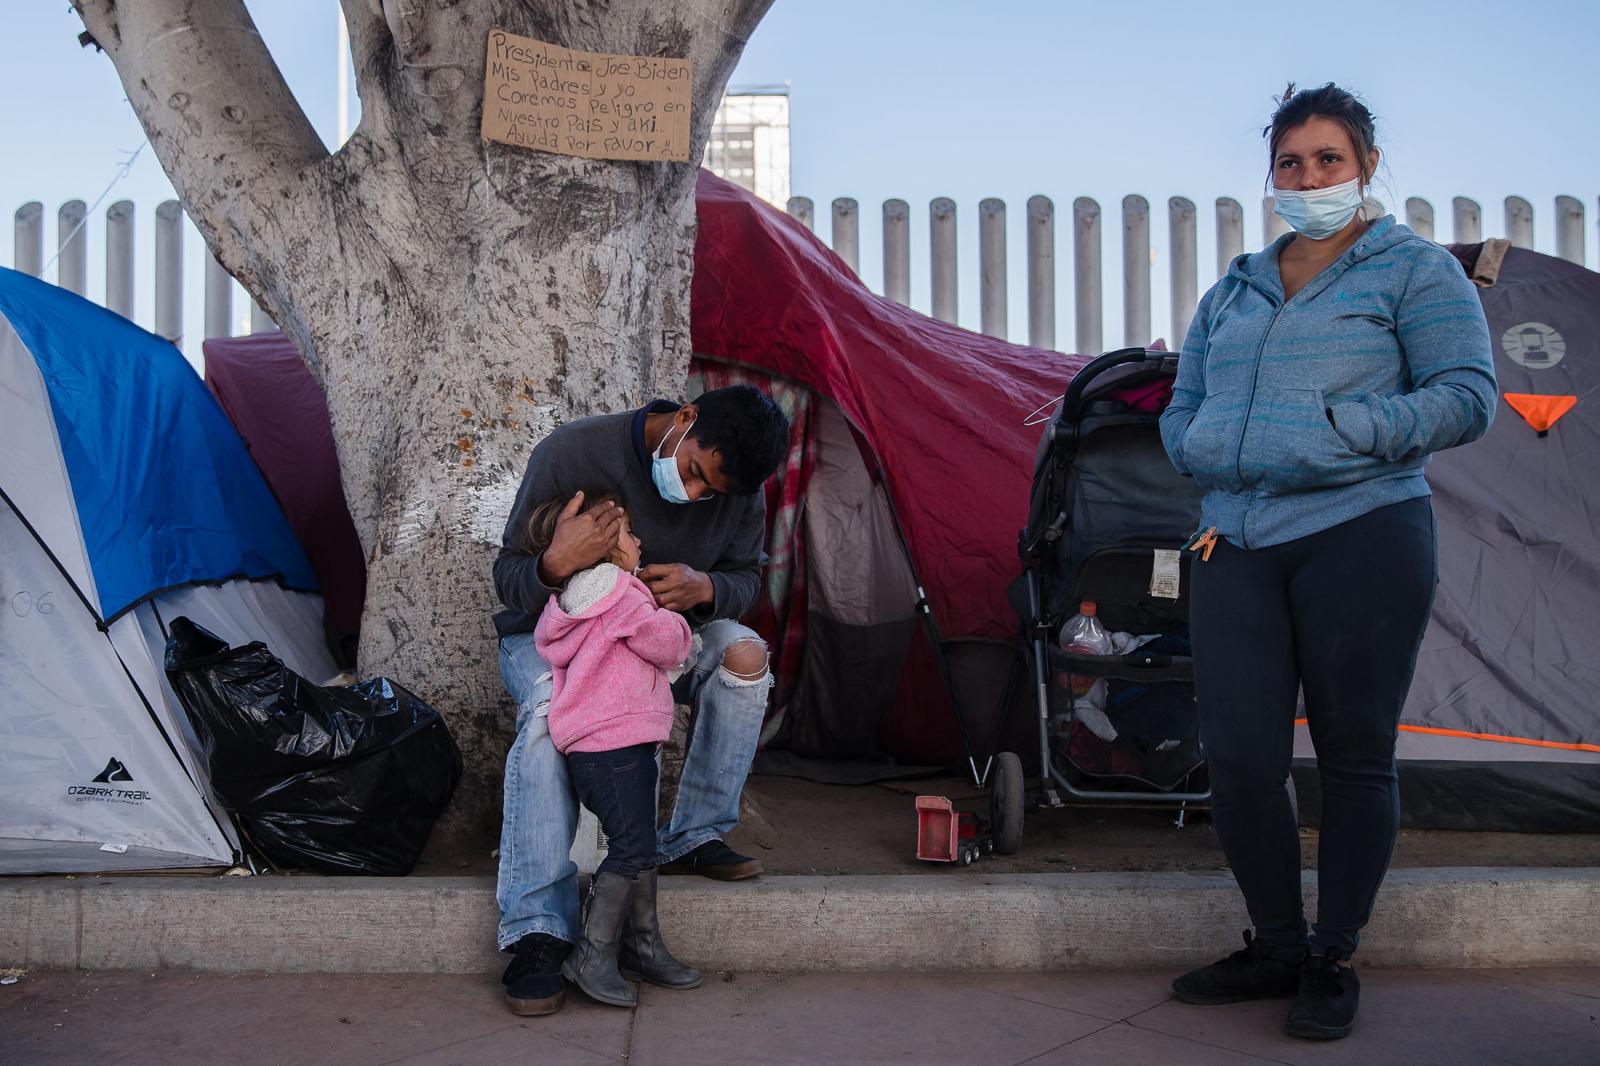 Berta Lidia Caballero (right) who is from Honduras stands near her husband Christian Antonio Reyes Flores and her daughter, Stacy Anai Reyes Caballero in front of El Chaparral port of entry in Tijuana, Mexico on March 2, 2021. They are waiting in hopes of entering the United States along with a few hundred of other migrants and asylum seekers sleeping in front of the port of entry.